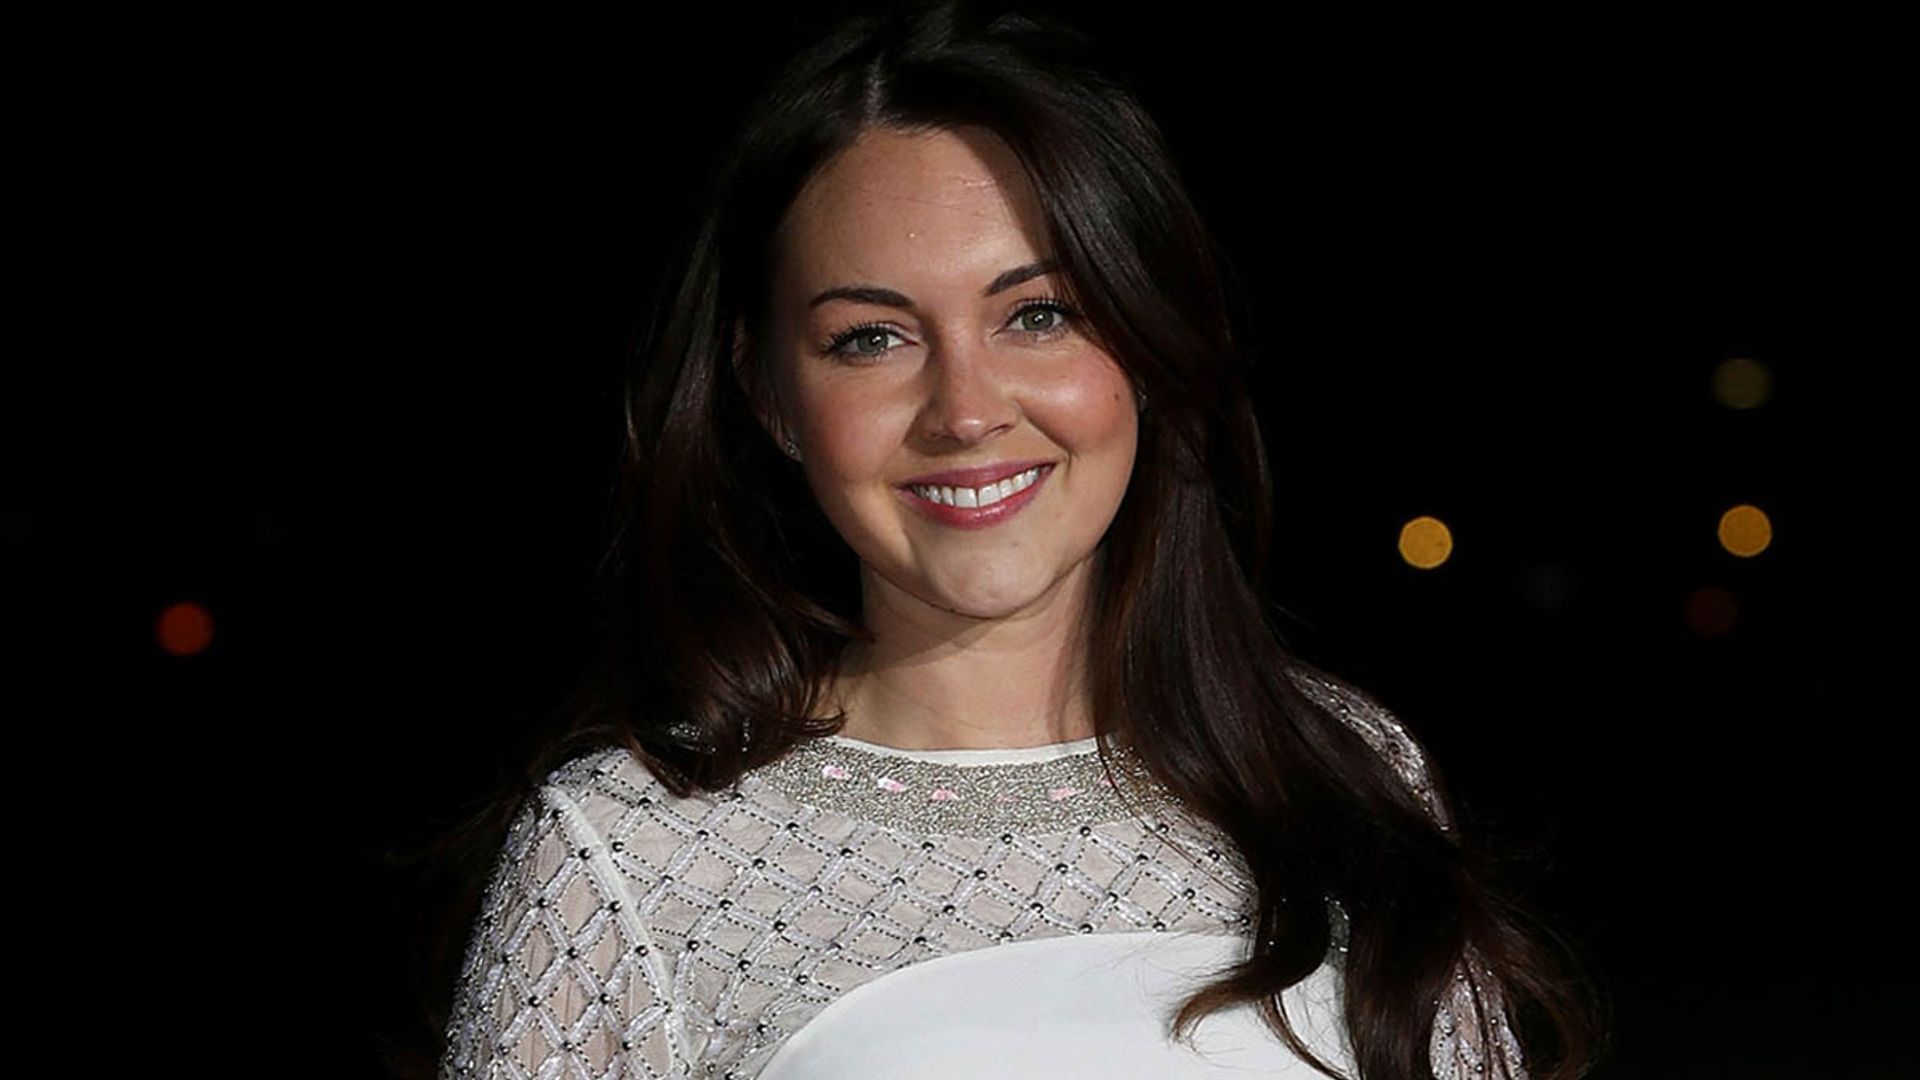 lacey turner